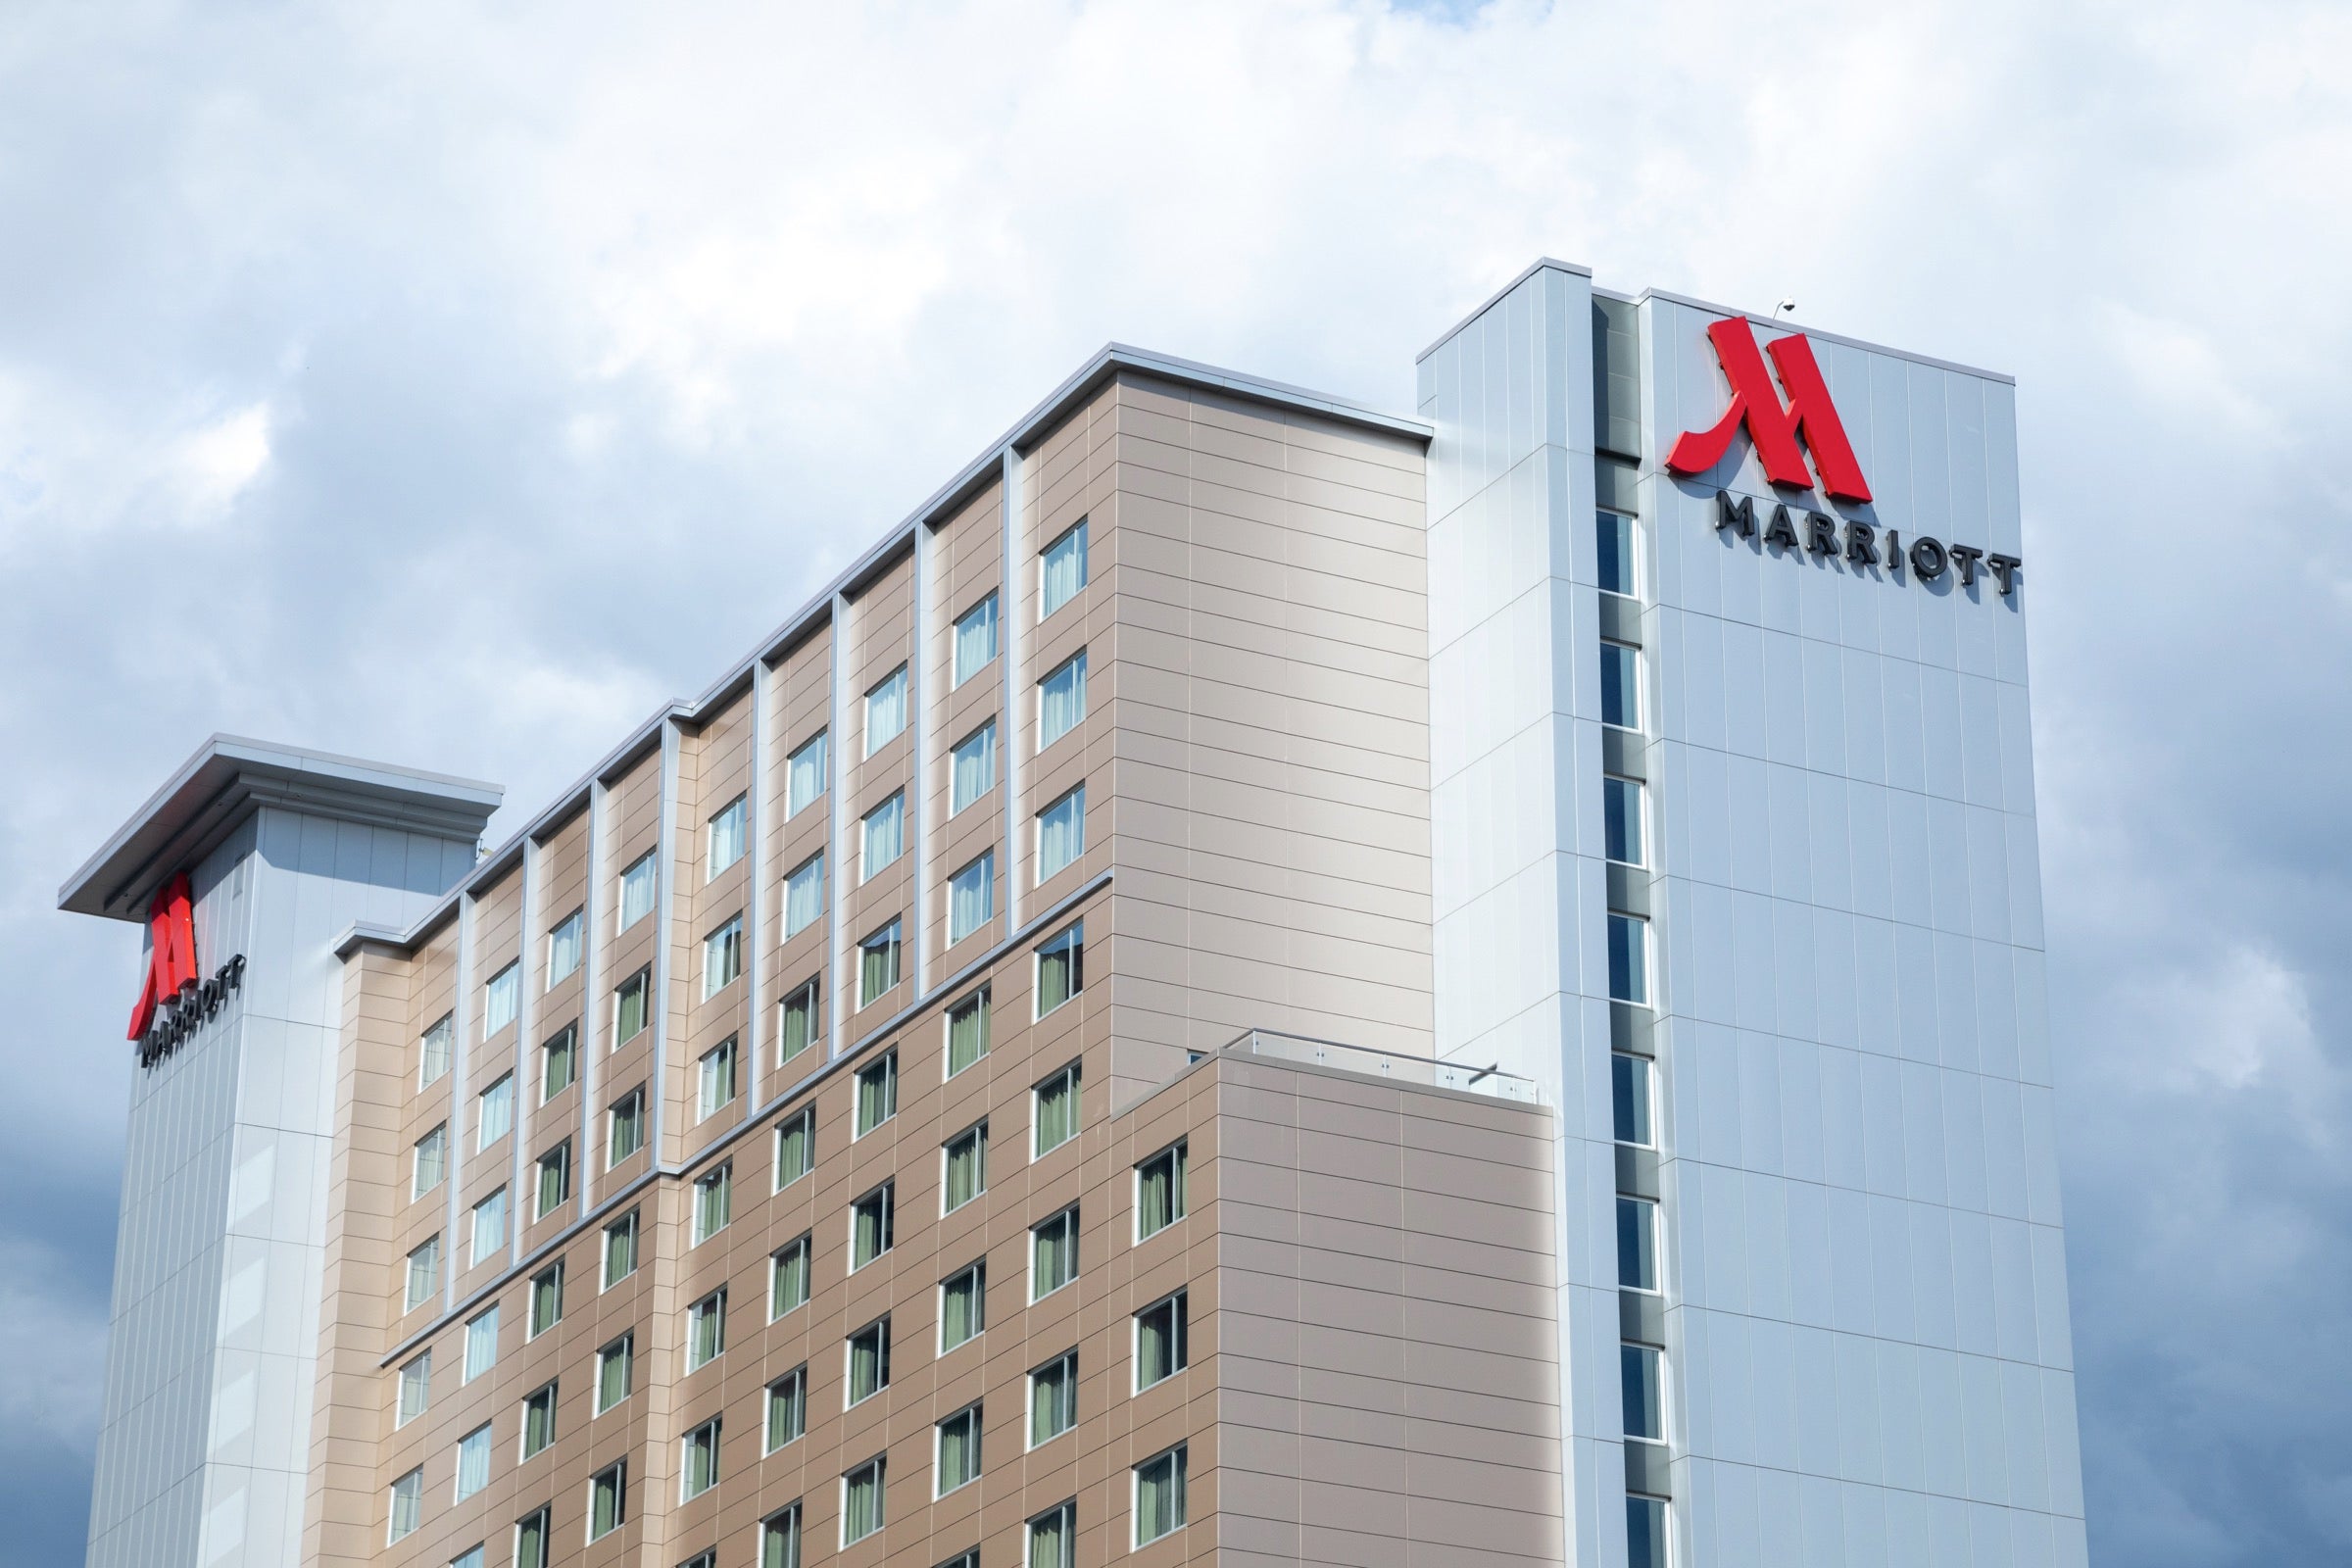 Marriott tosses on yet another fee to rooms at select Los Angeles hotels